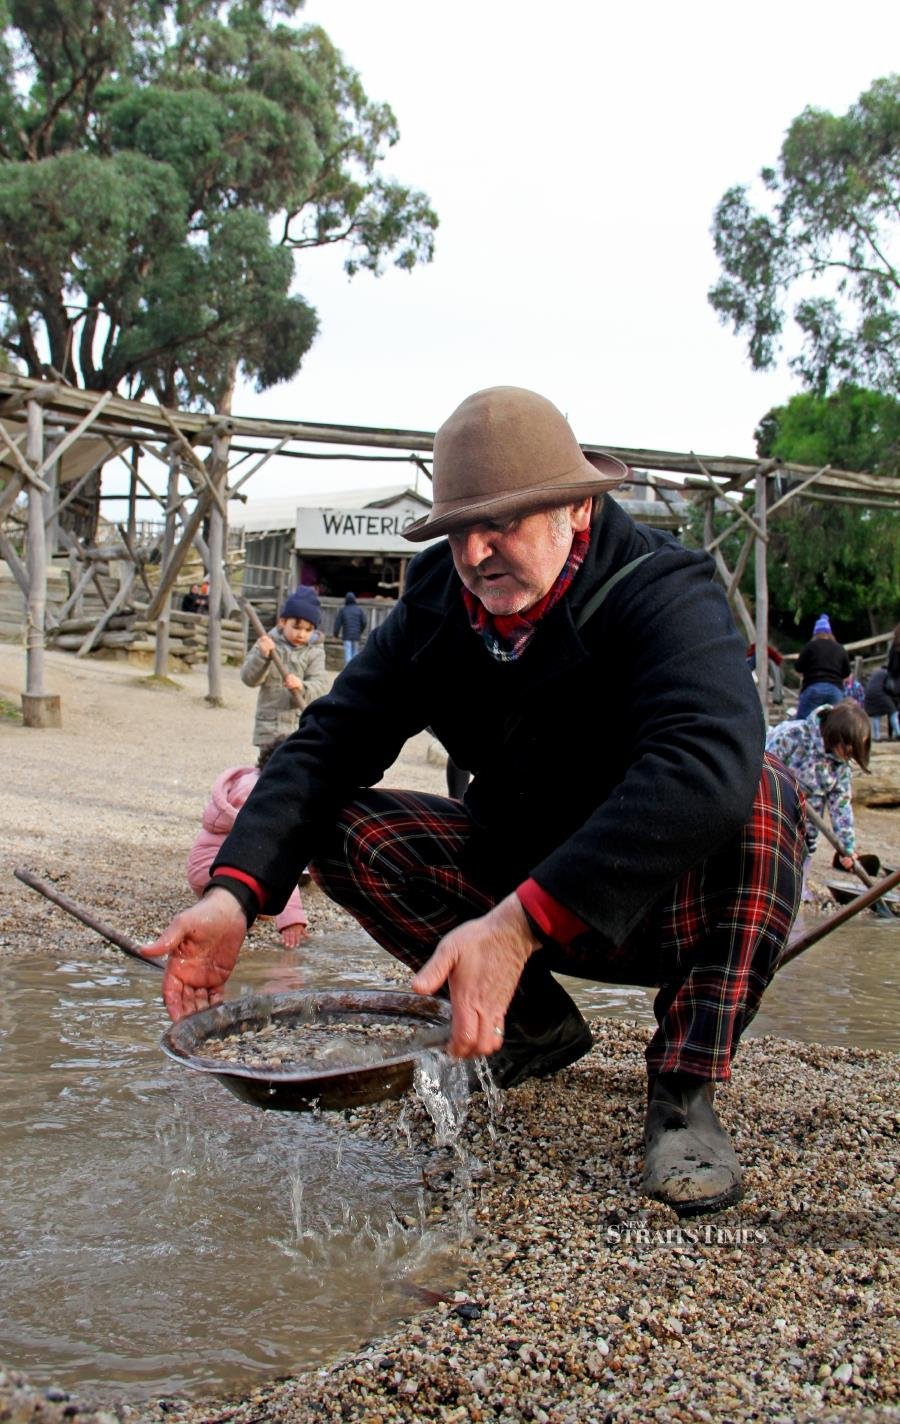 Panning for gold is one of the highlights of a visit to Sovereign Hill.